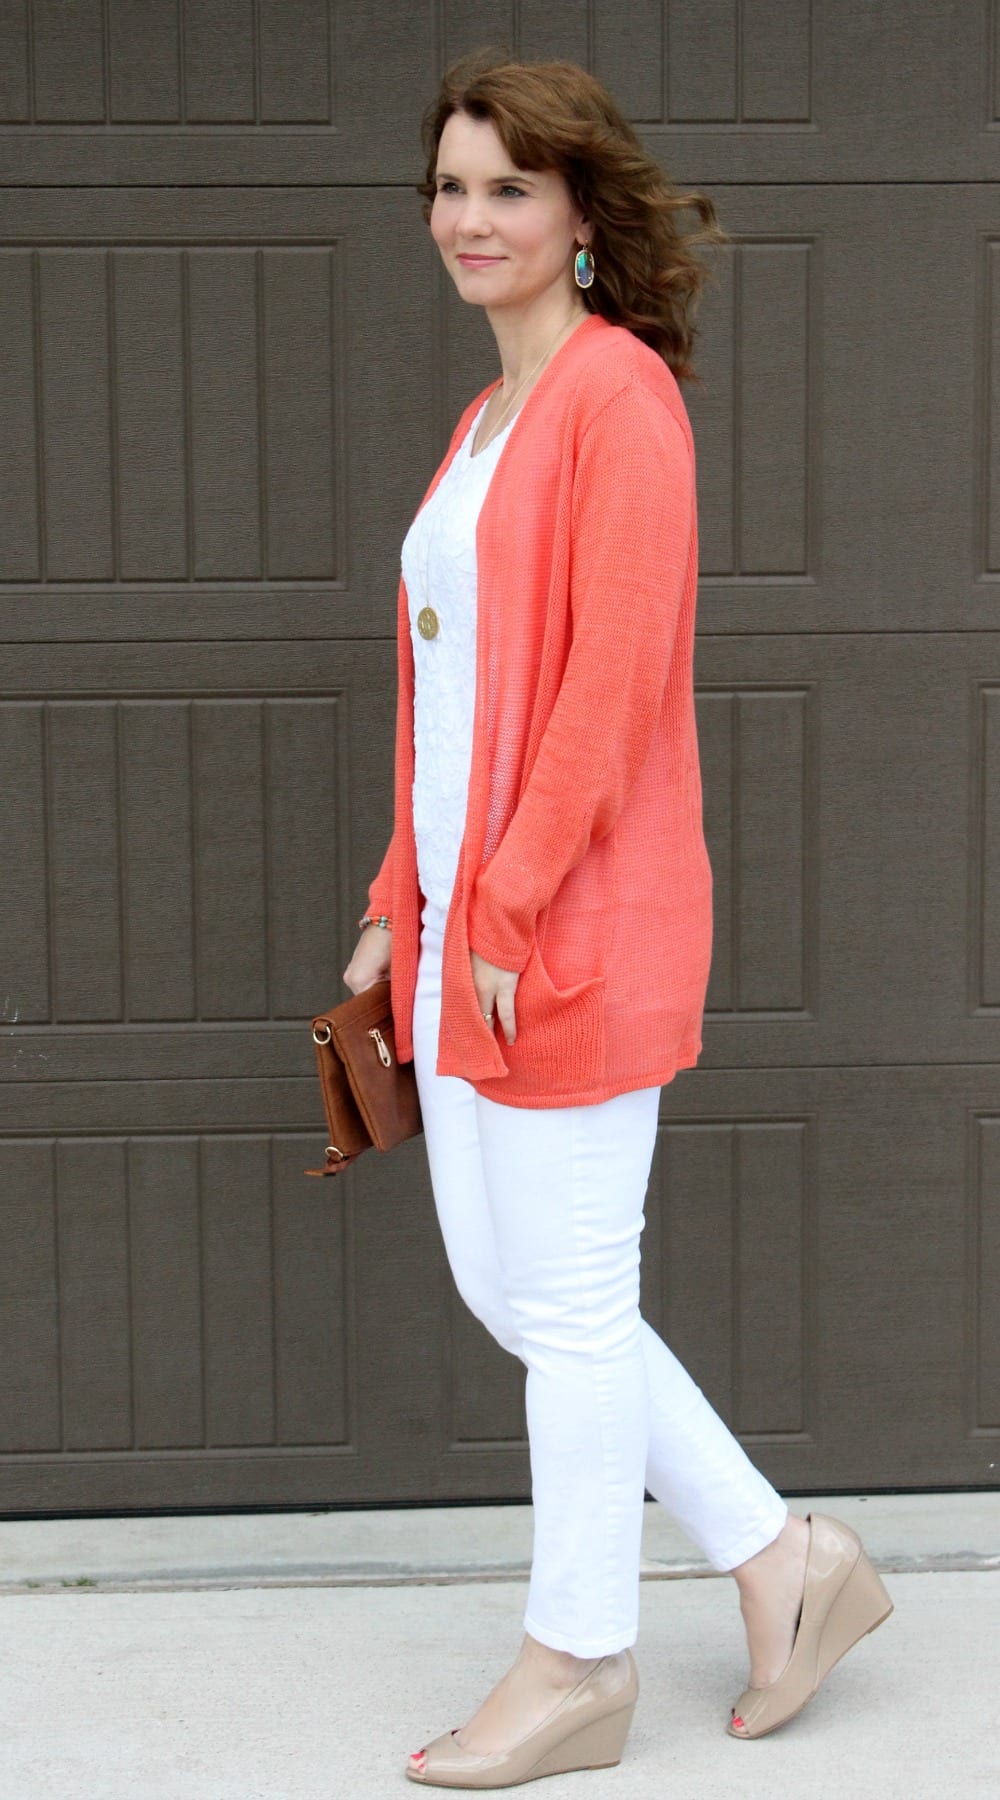 Spring outfit idea - nude patent wedges, white denim, white lace top and a coal cardigan.